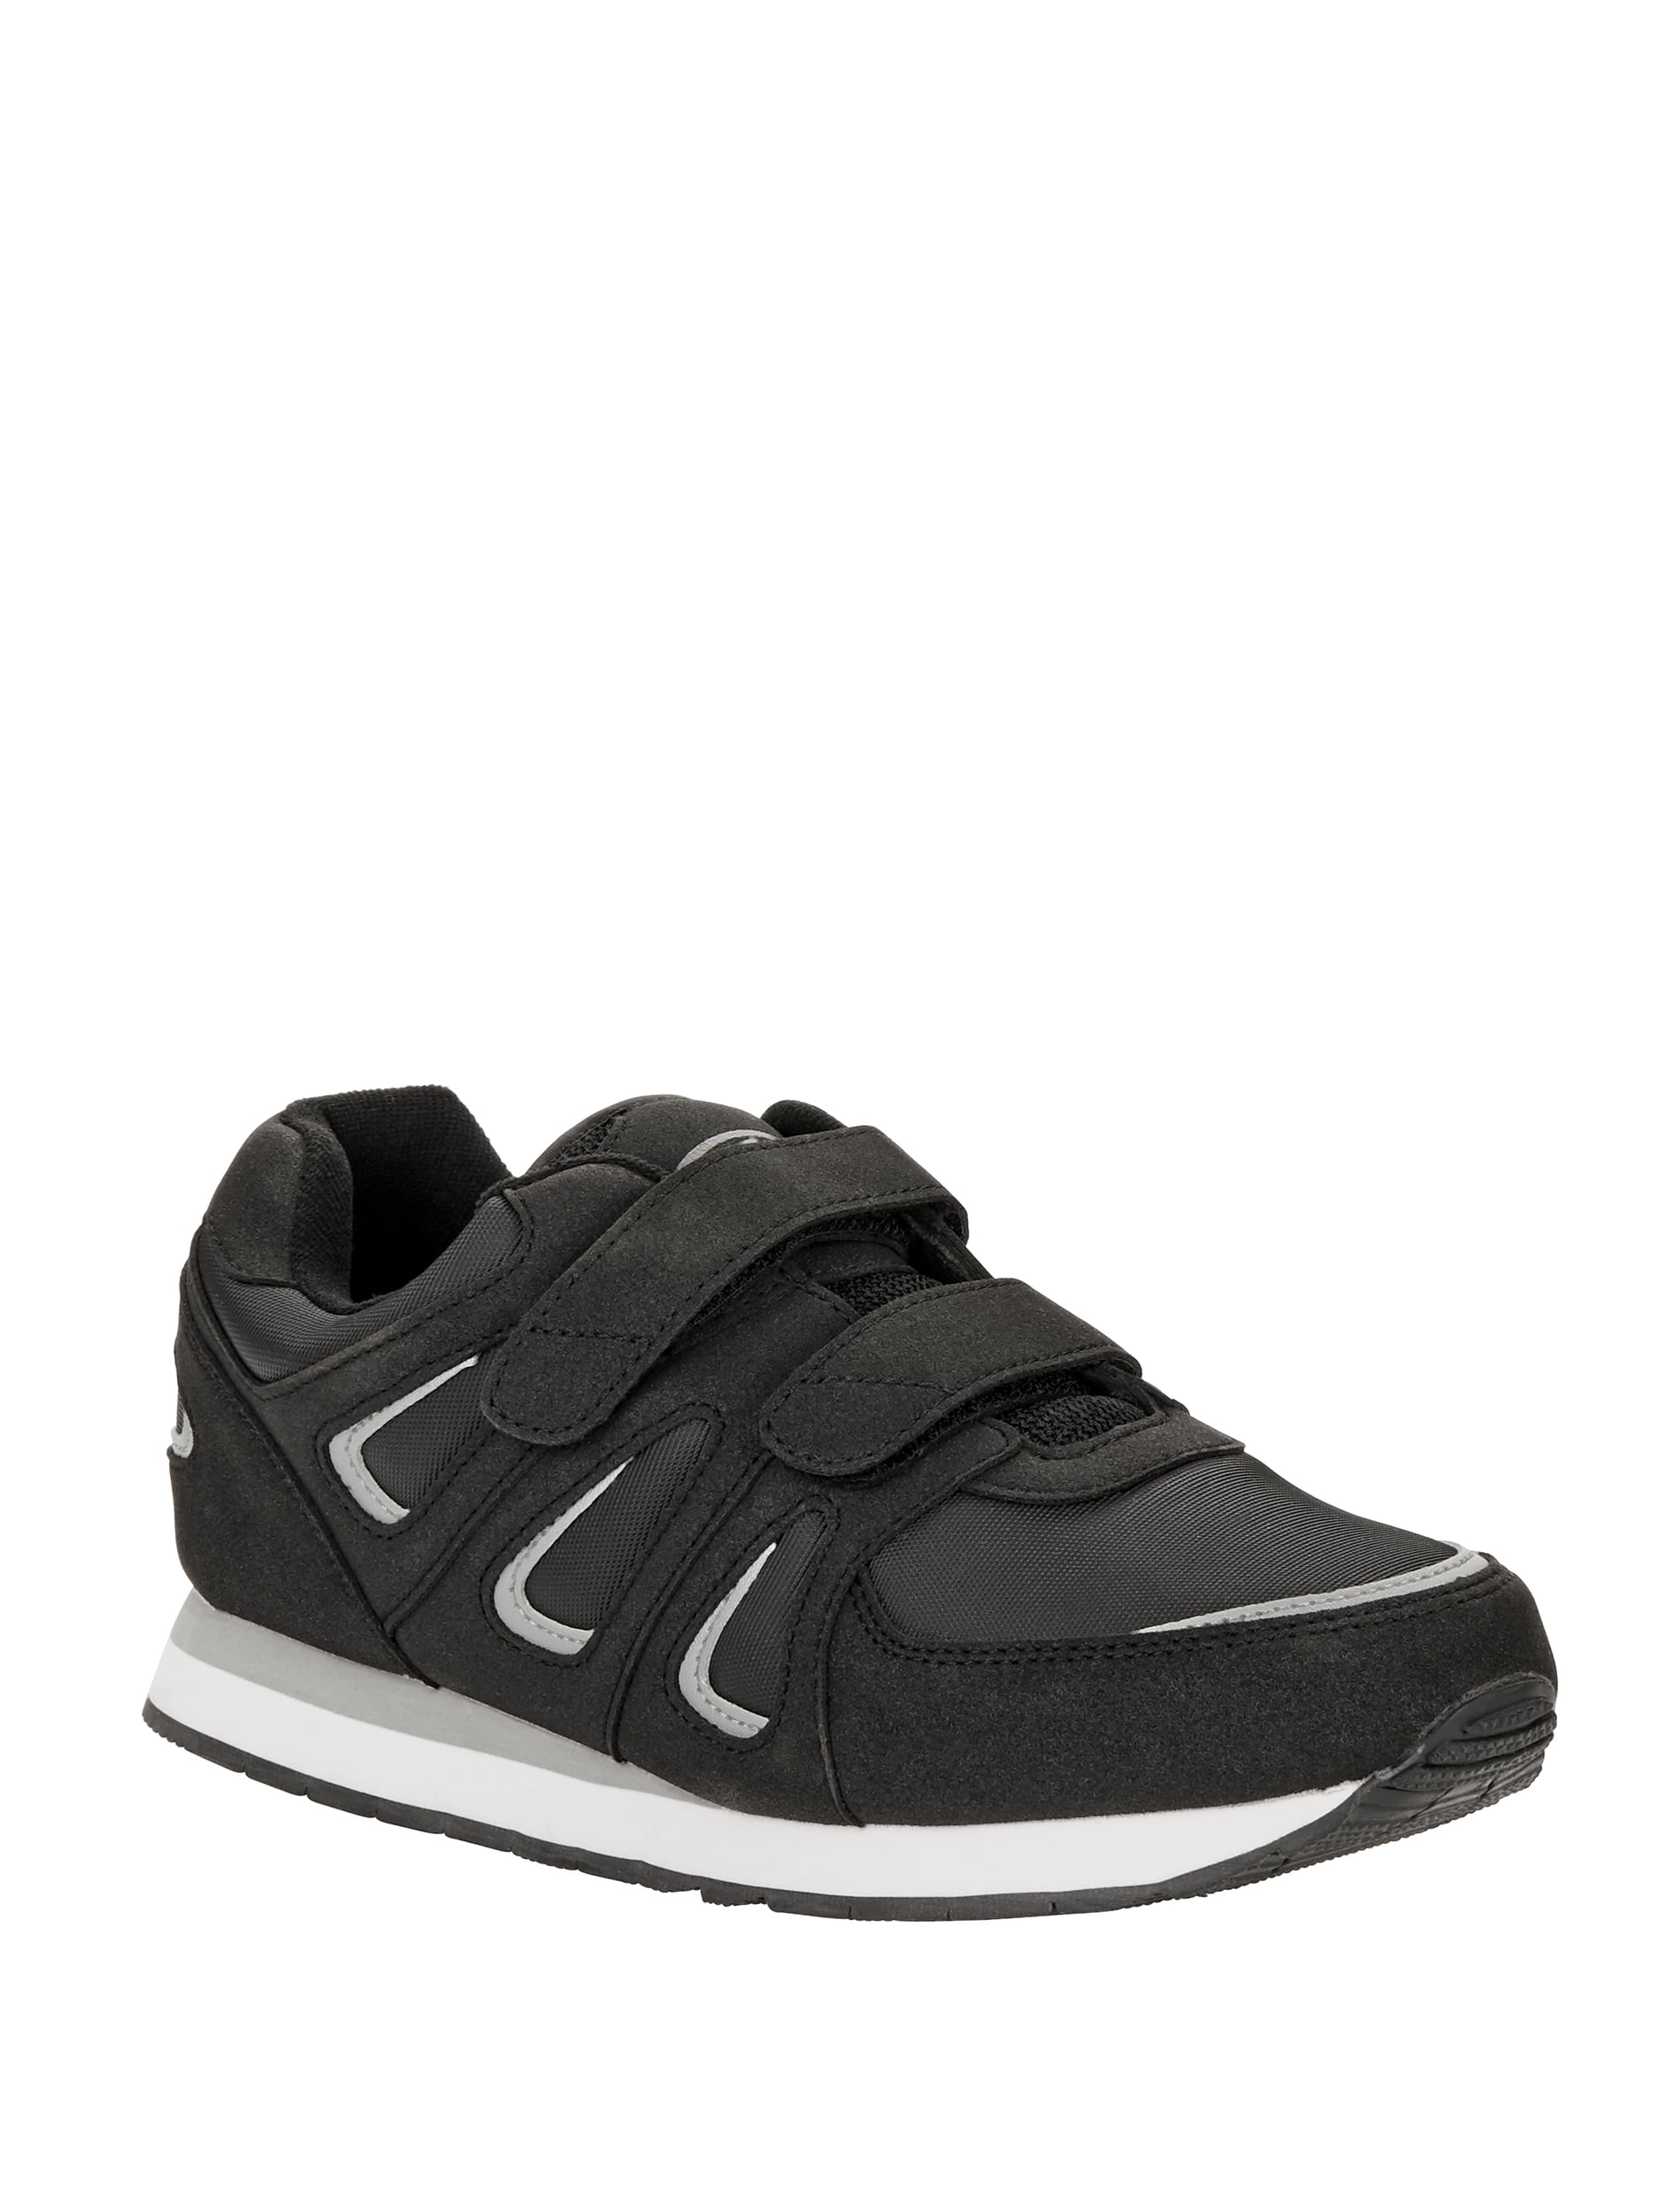 Silver Series Athletic Shoe 